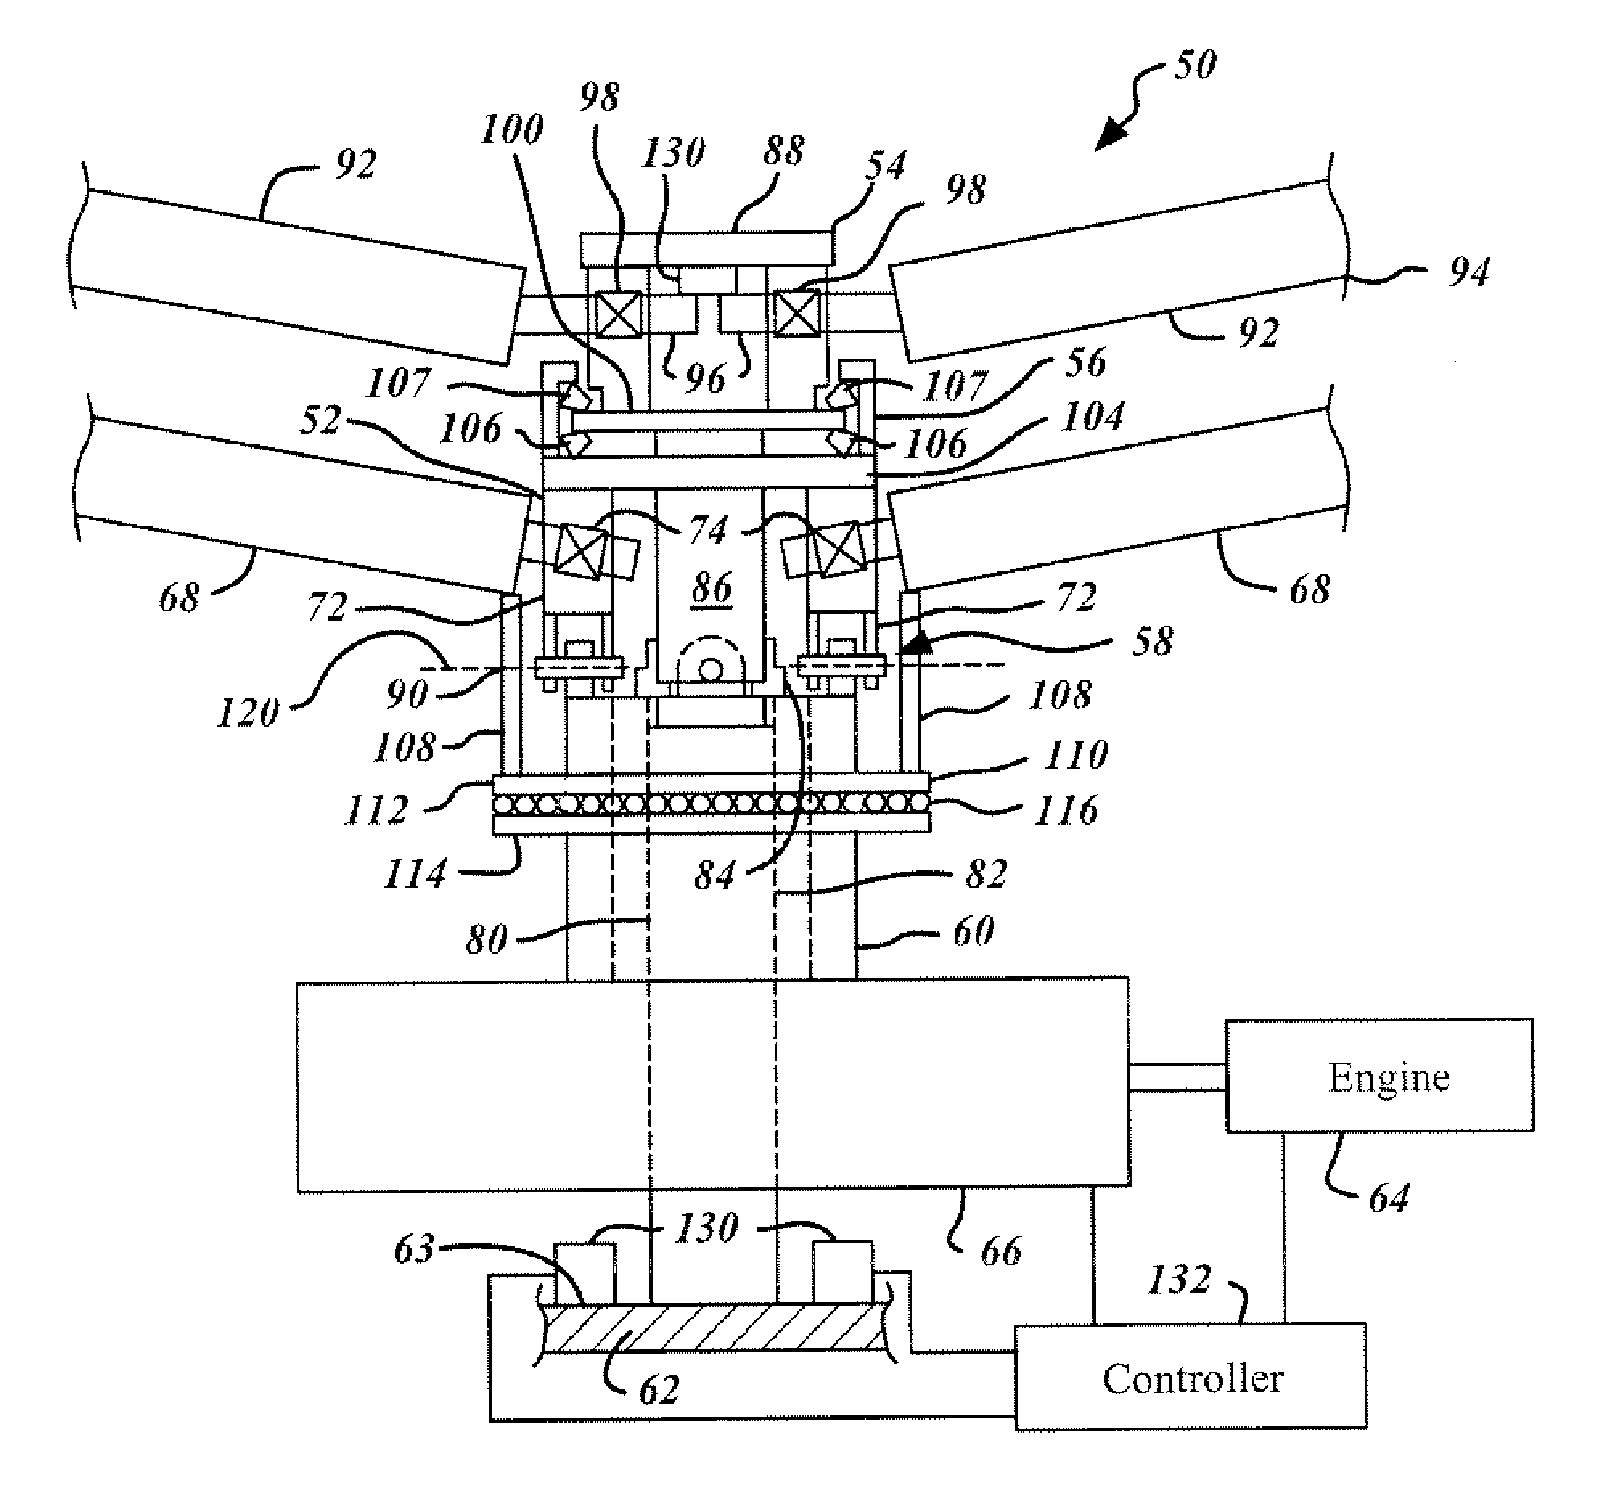 An unloaded lift offset rotor system for a helicopter